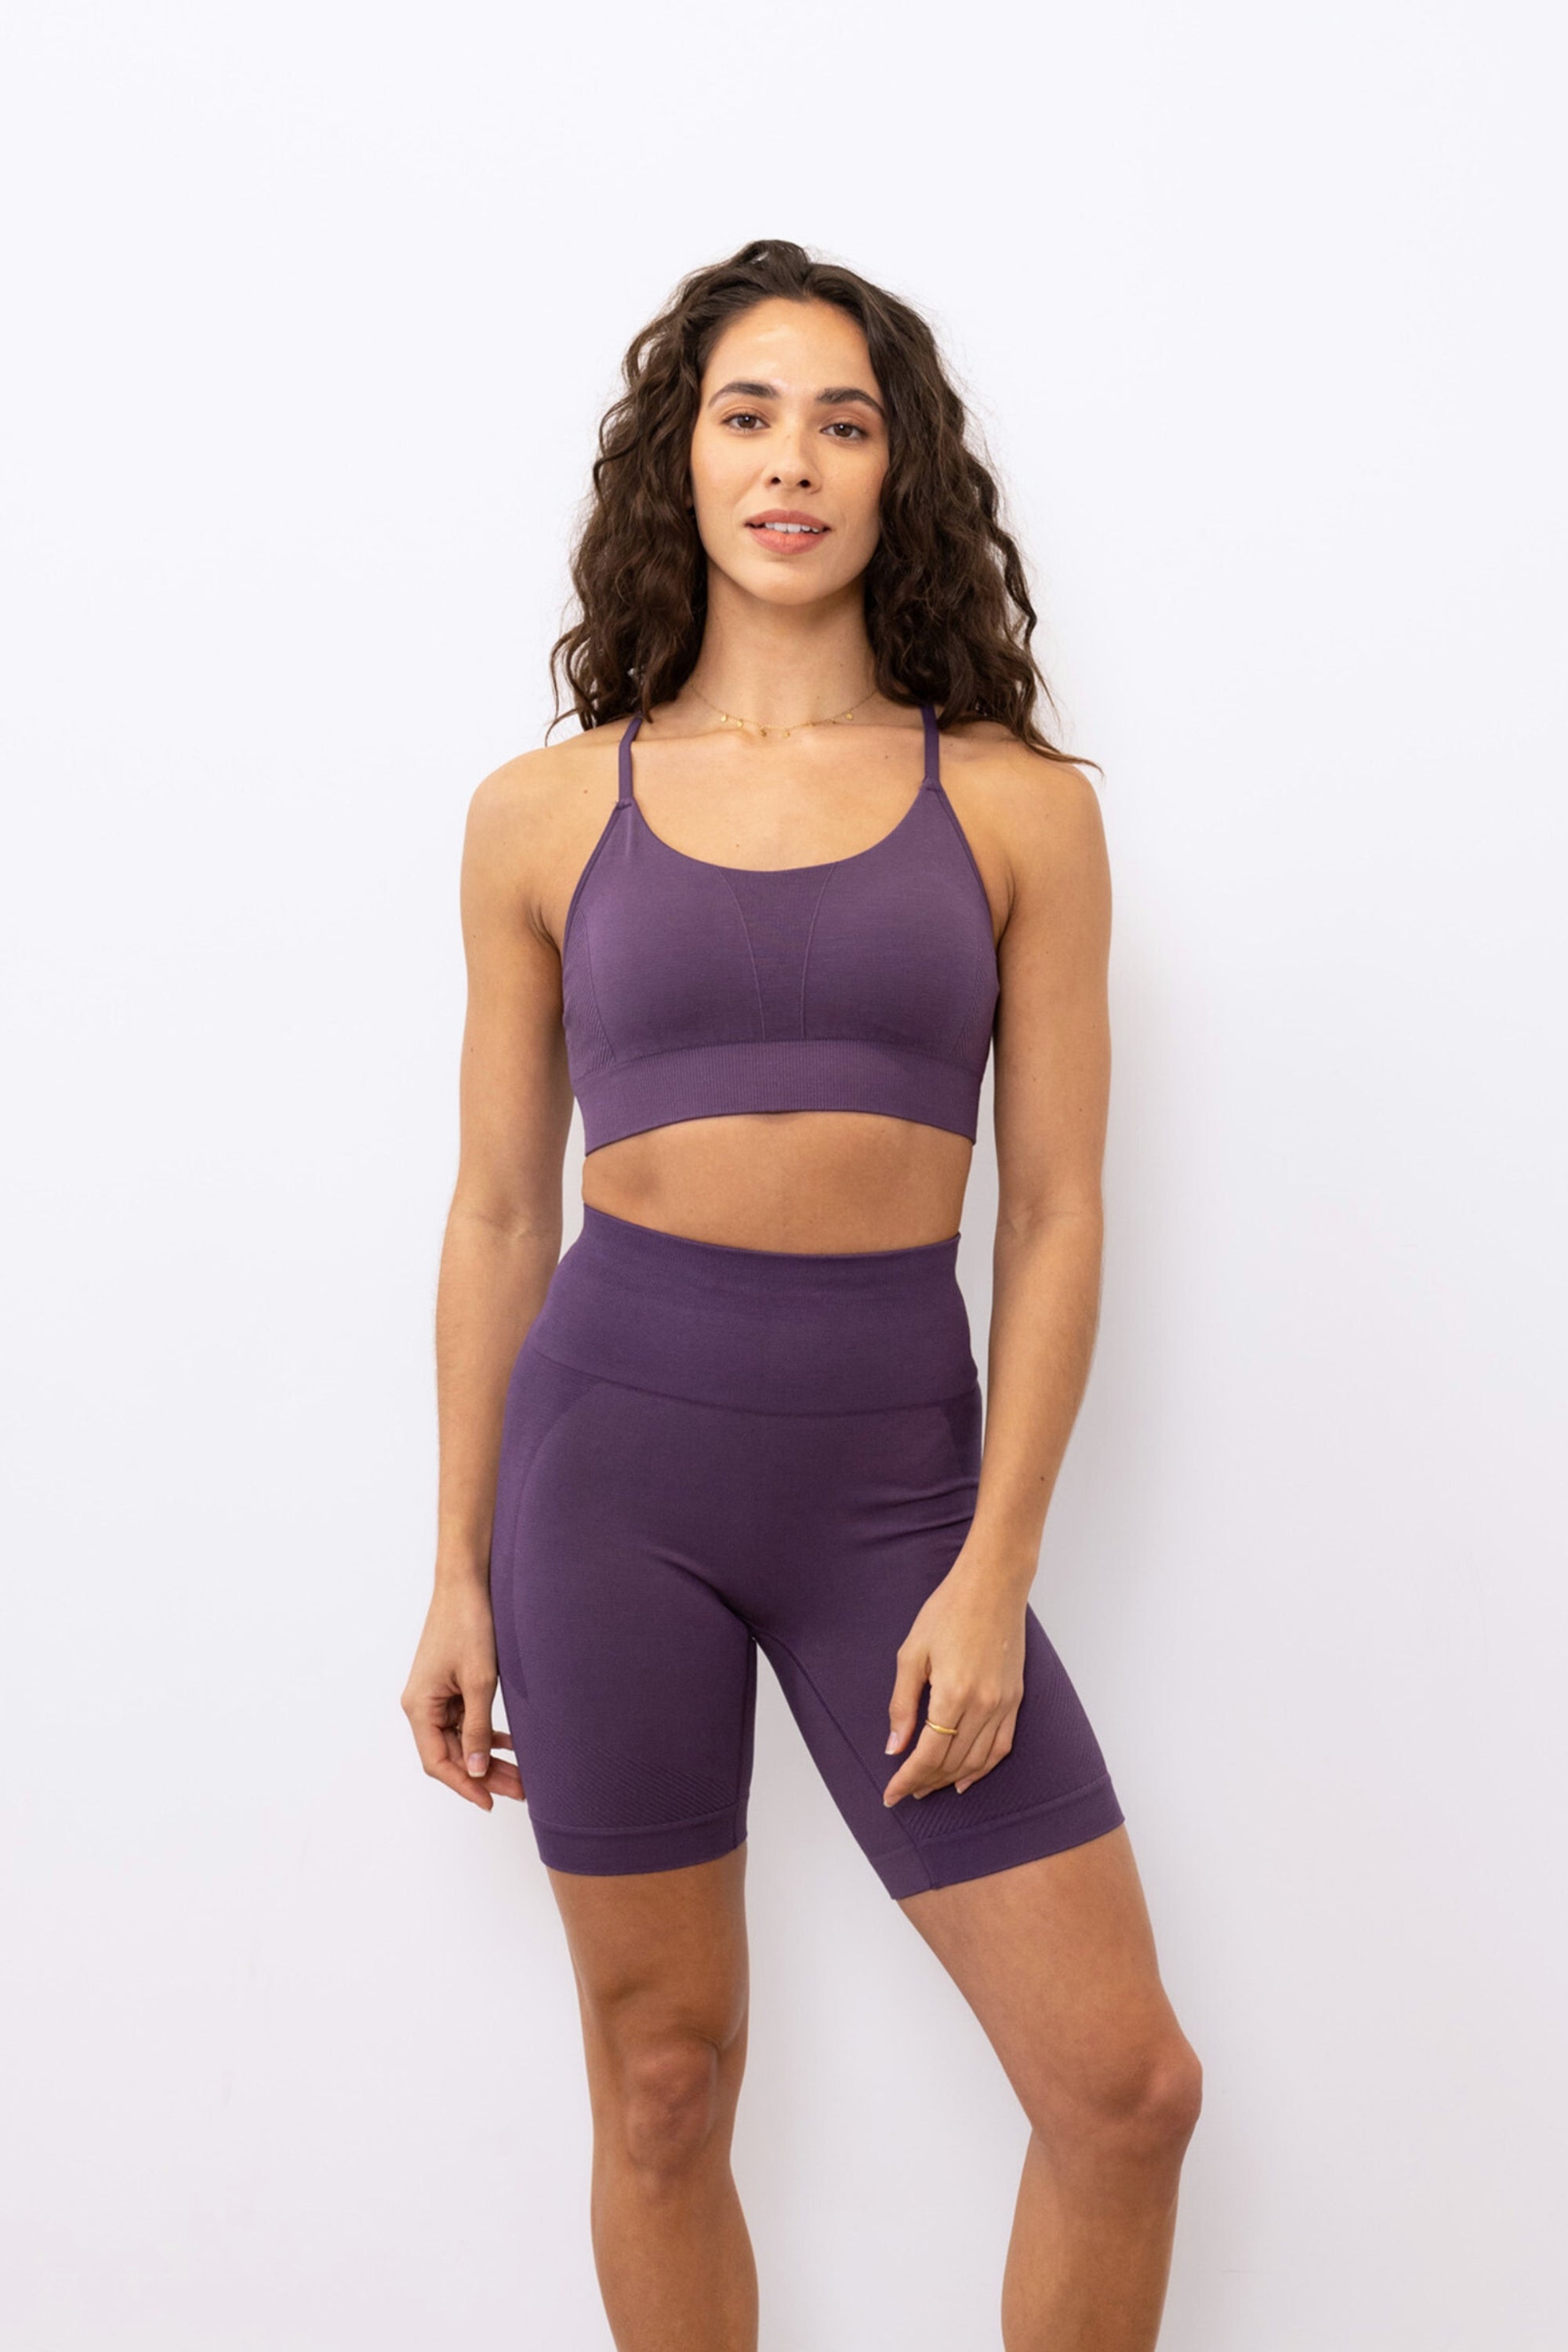 Purple ribbed recycled modal shorts and padded supportive sculpting sports bra for running, yoga, gym and pilates from sustainable activewear brand Jilla Active Edit alt text